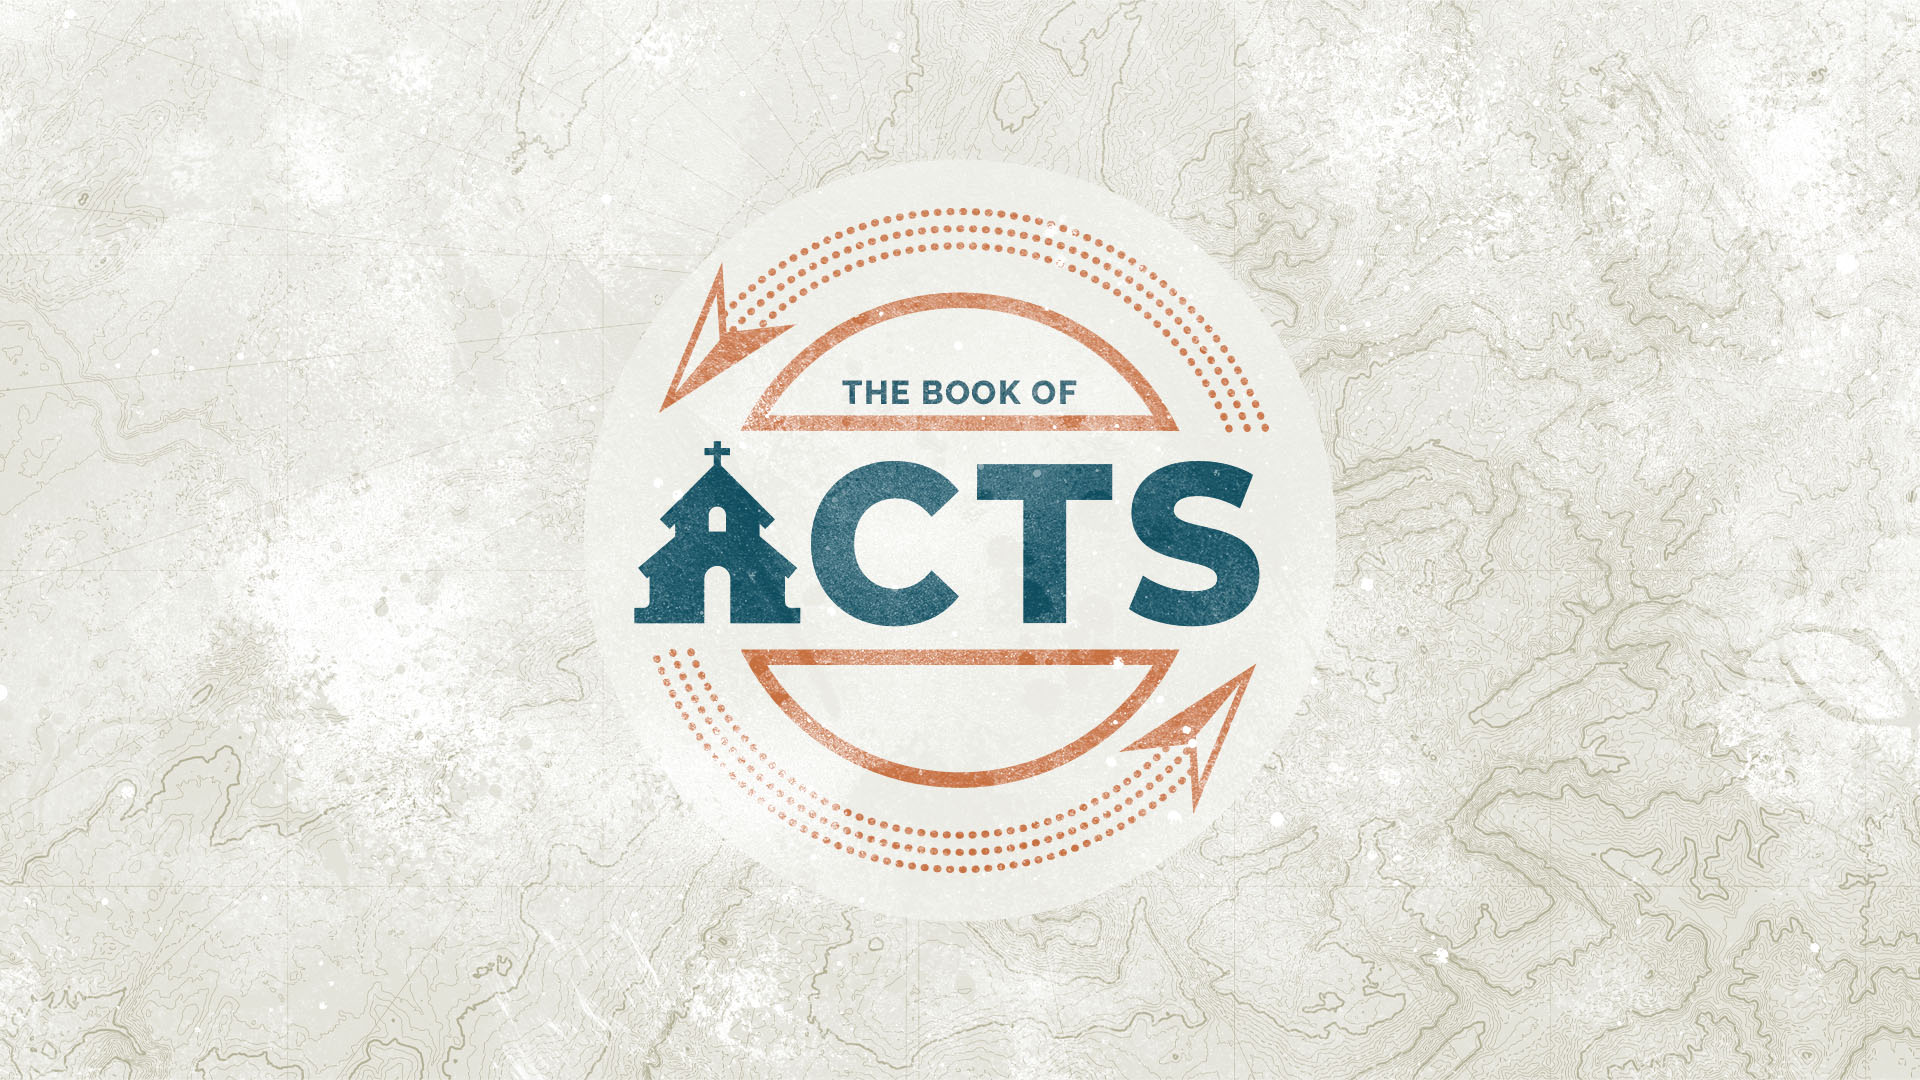 ACTS | TURN THE LIGHTS ON